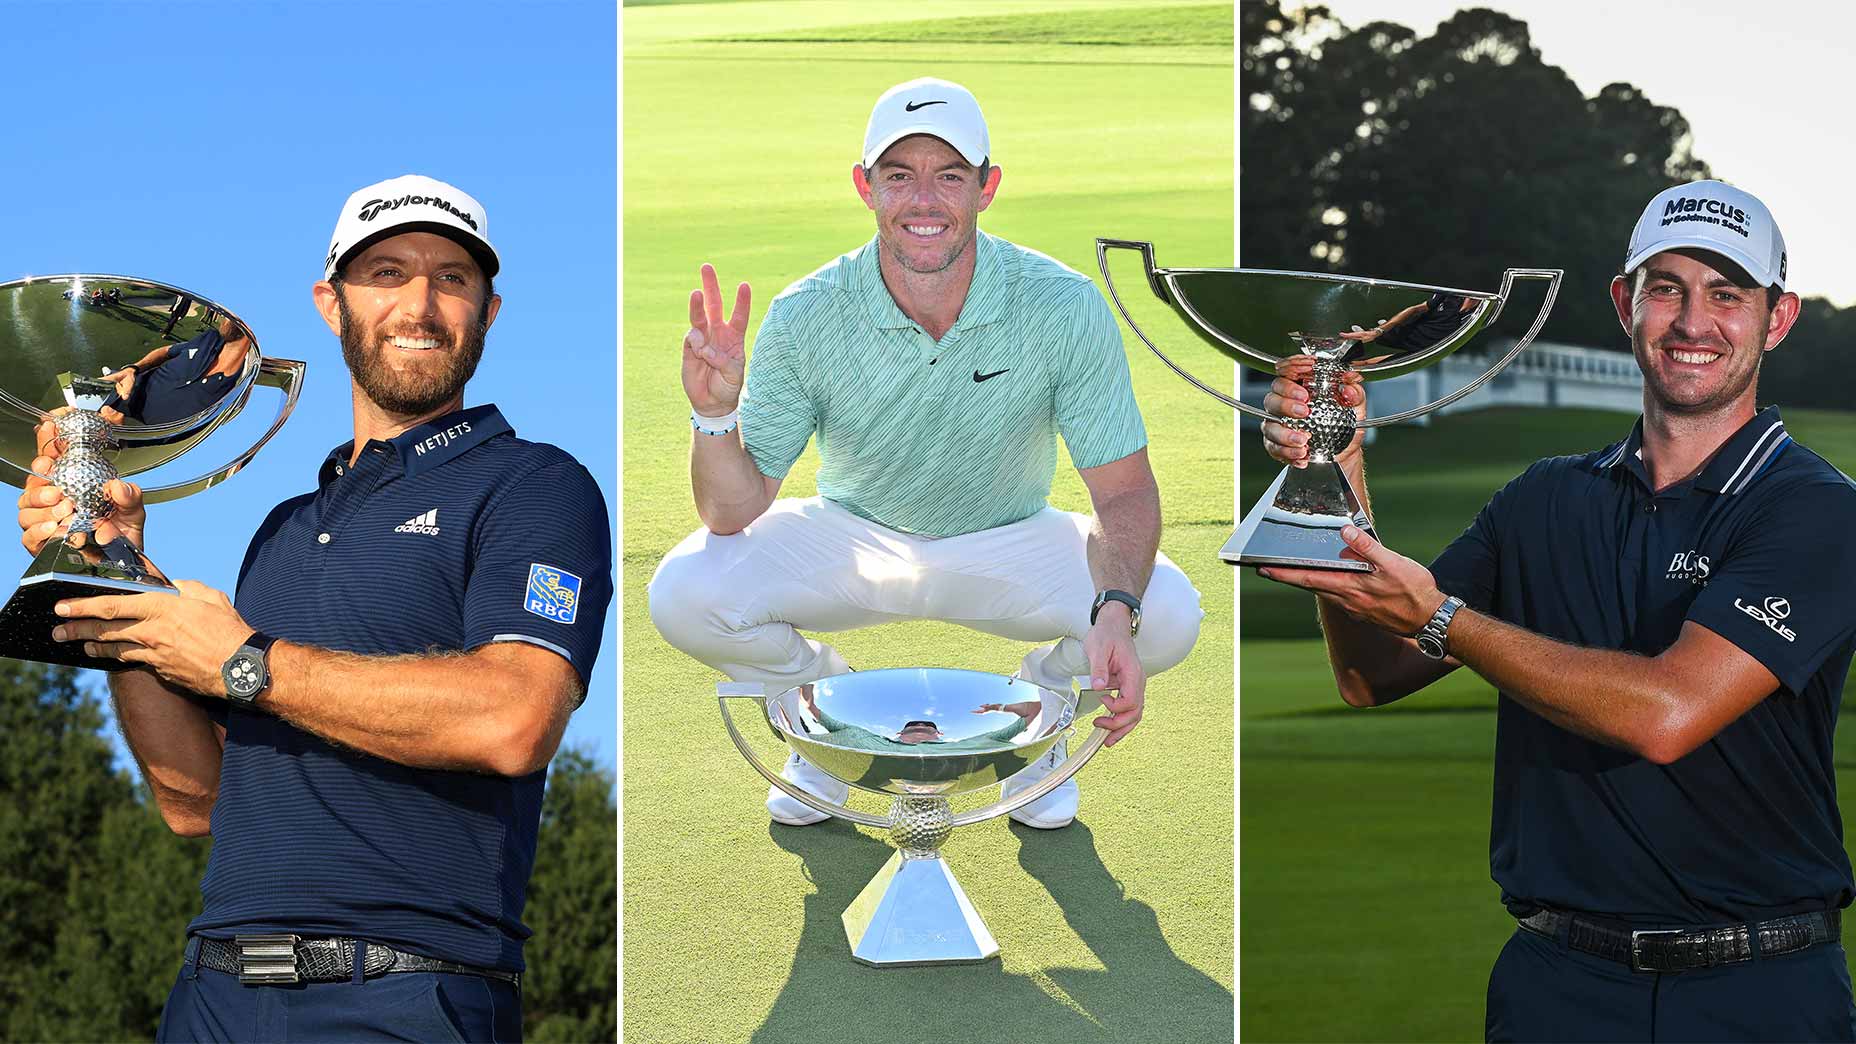 The Starting Positions and Scores of the Last Four FedEx Cup Winners at